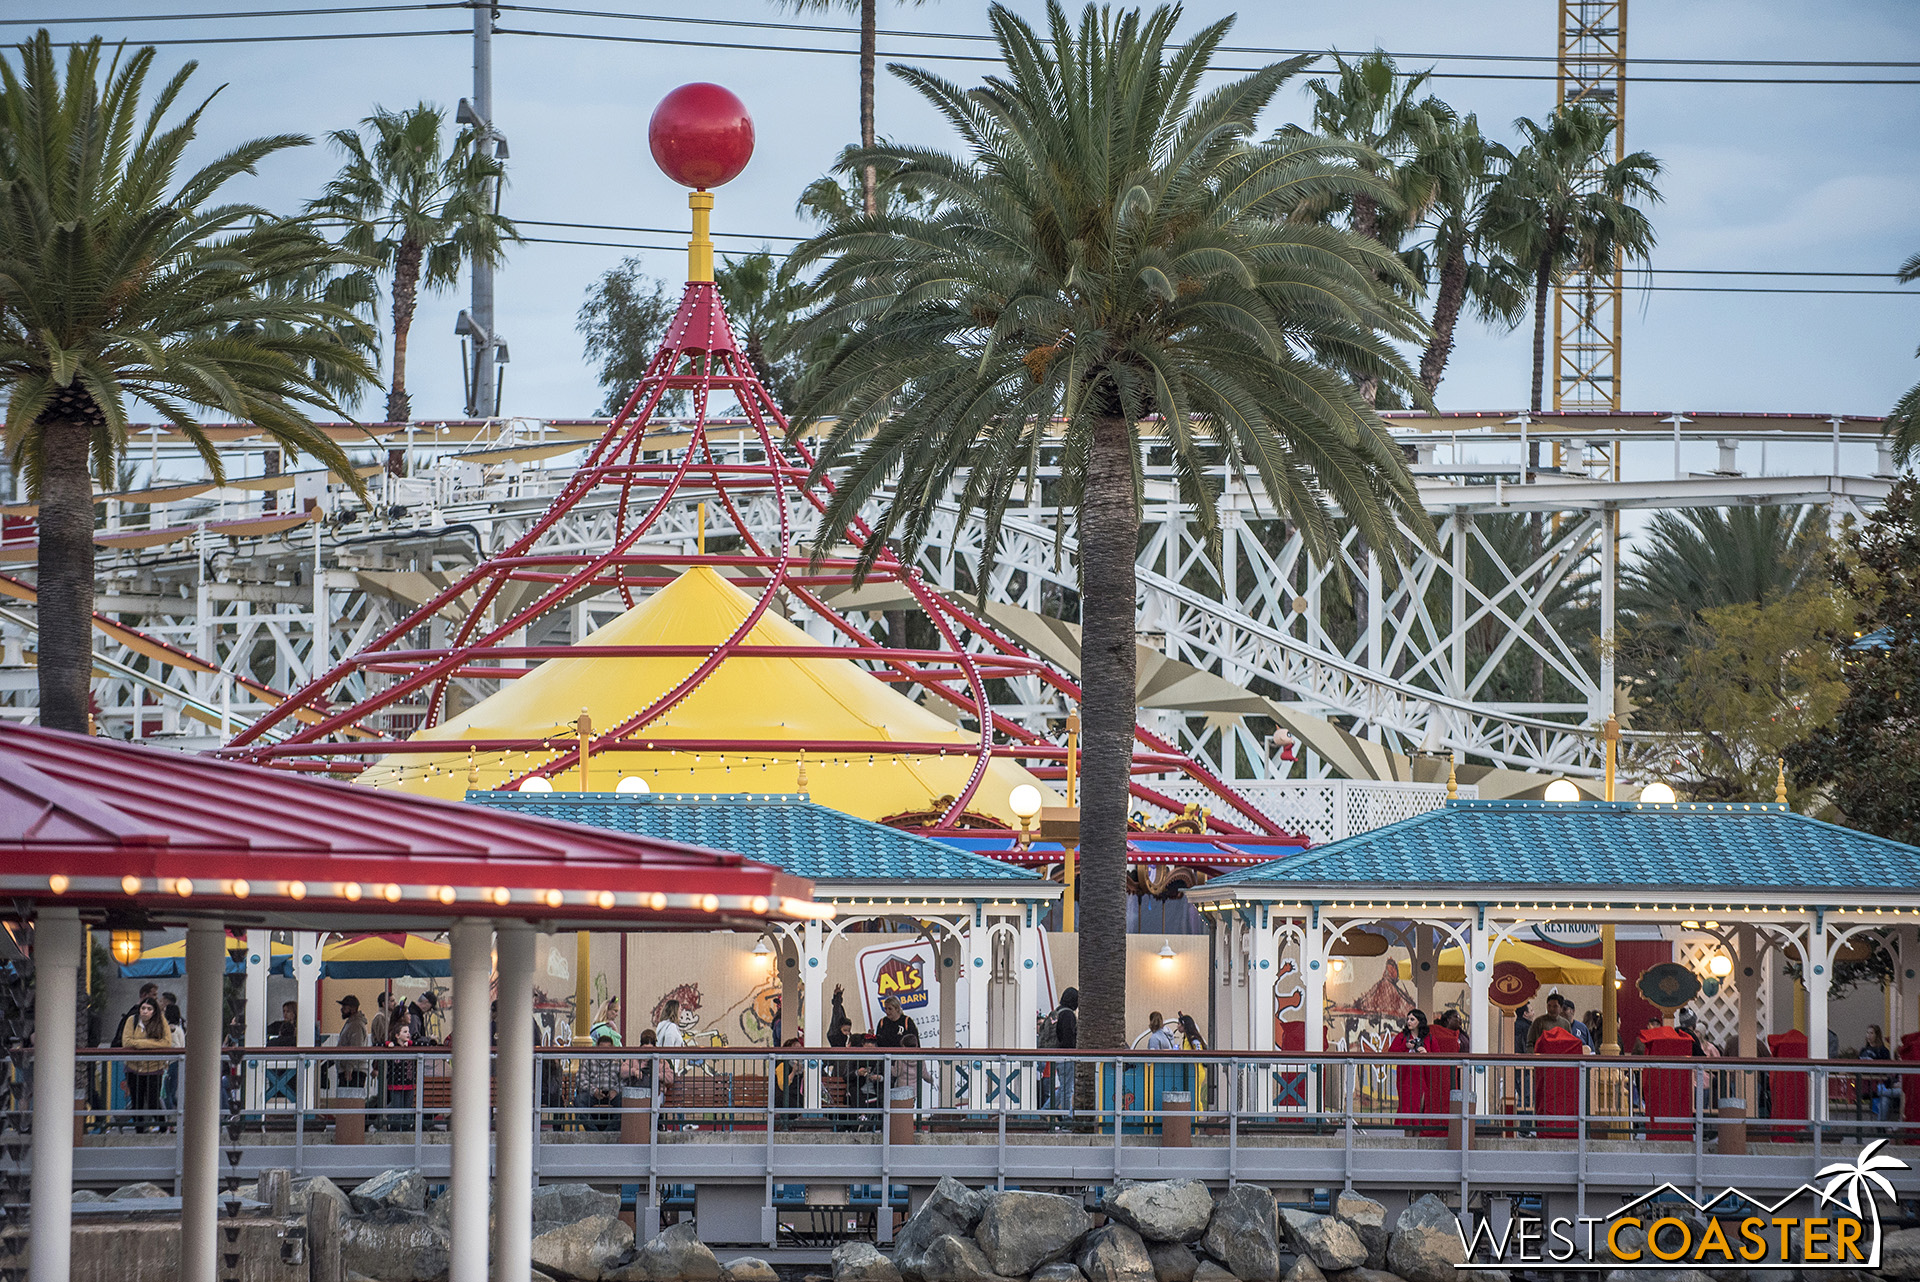  The roofs elsewhere in the Toy Story part of Pixar Pier are turquoise.  So what do they paint the top of Jessie’s Critter Carousel?  Yellow, of course.  Well, it does go better with the red. 